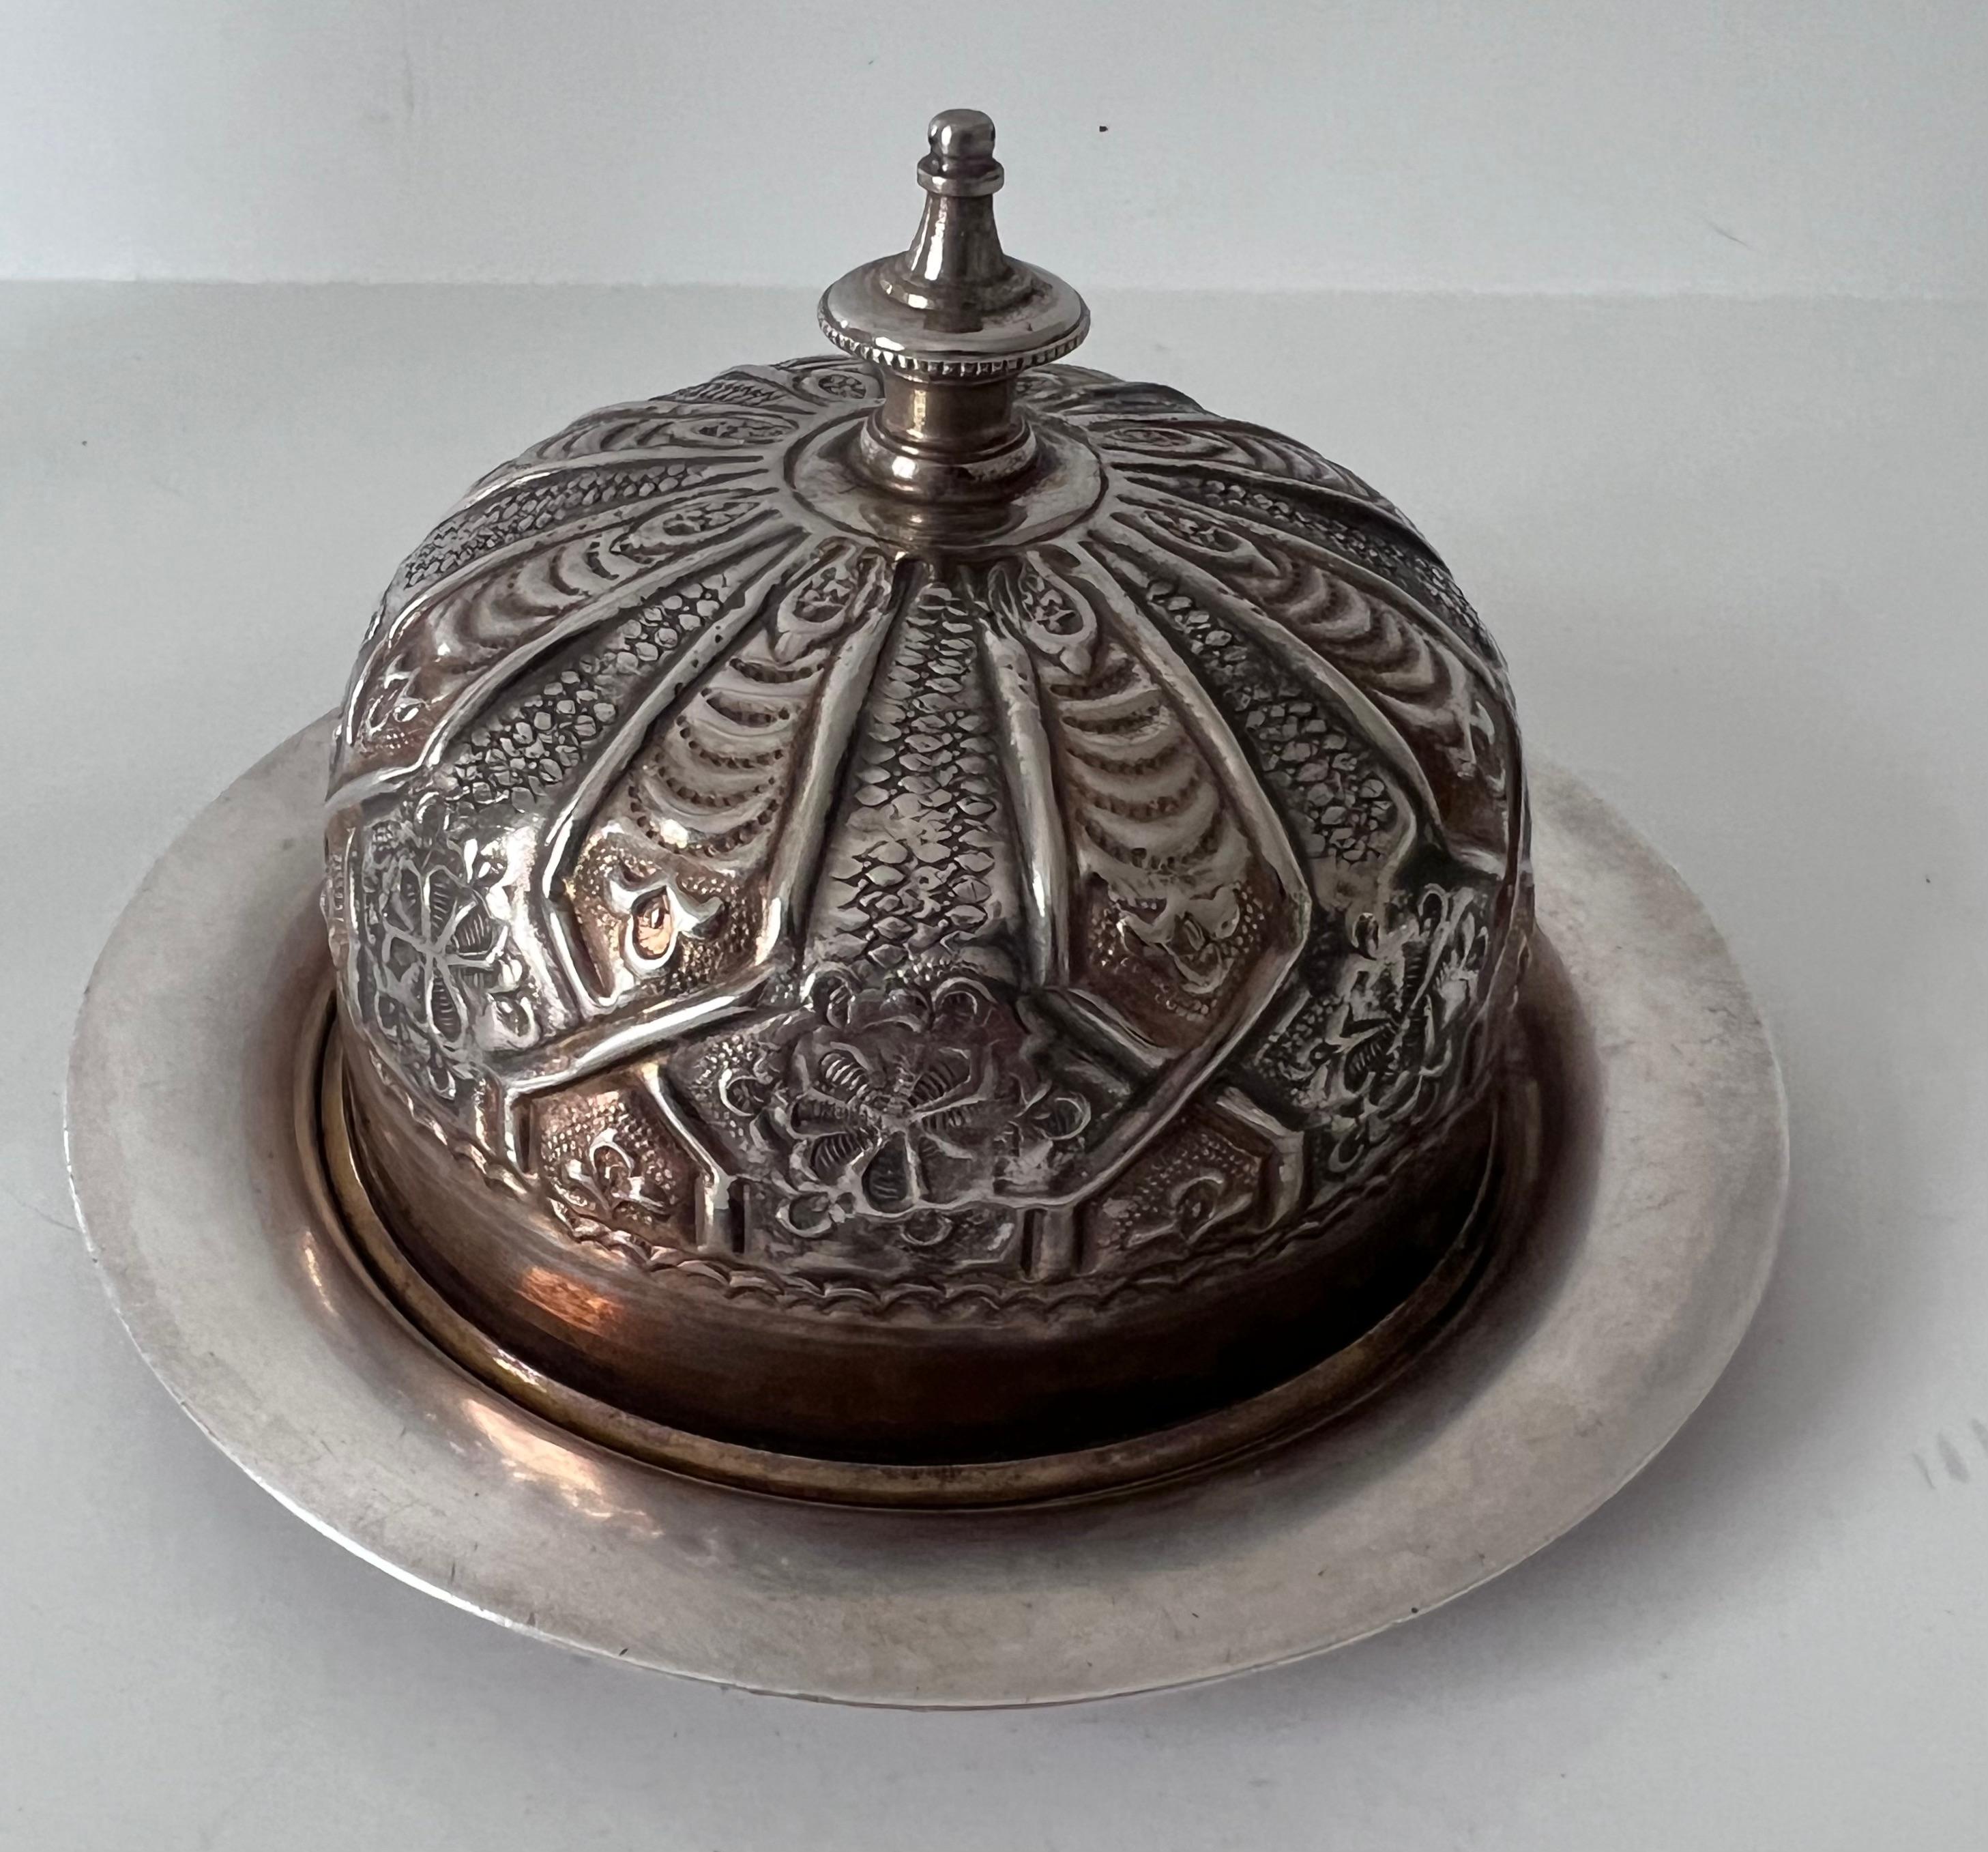 Domed French Silver Plate Repoussé Butter or Covered Dish Plate For Sale 6